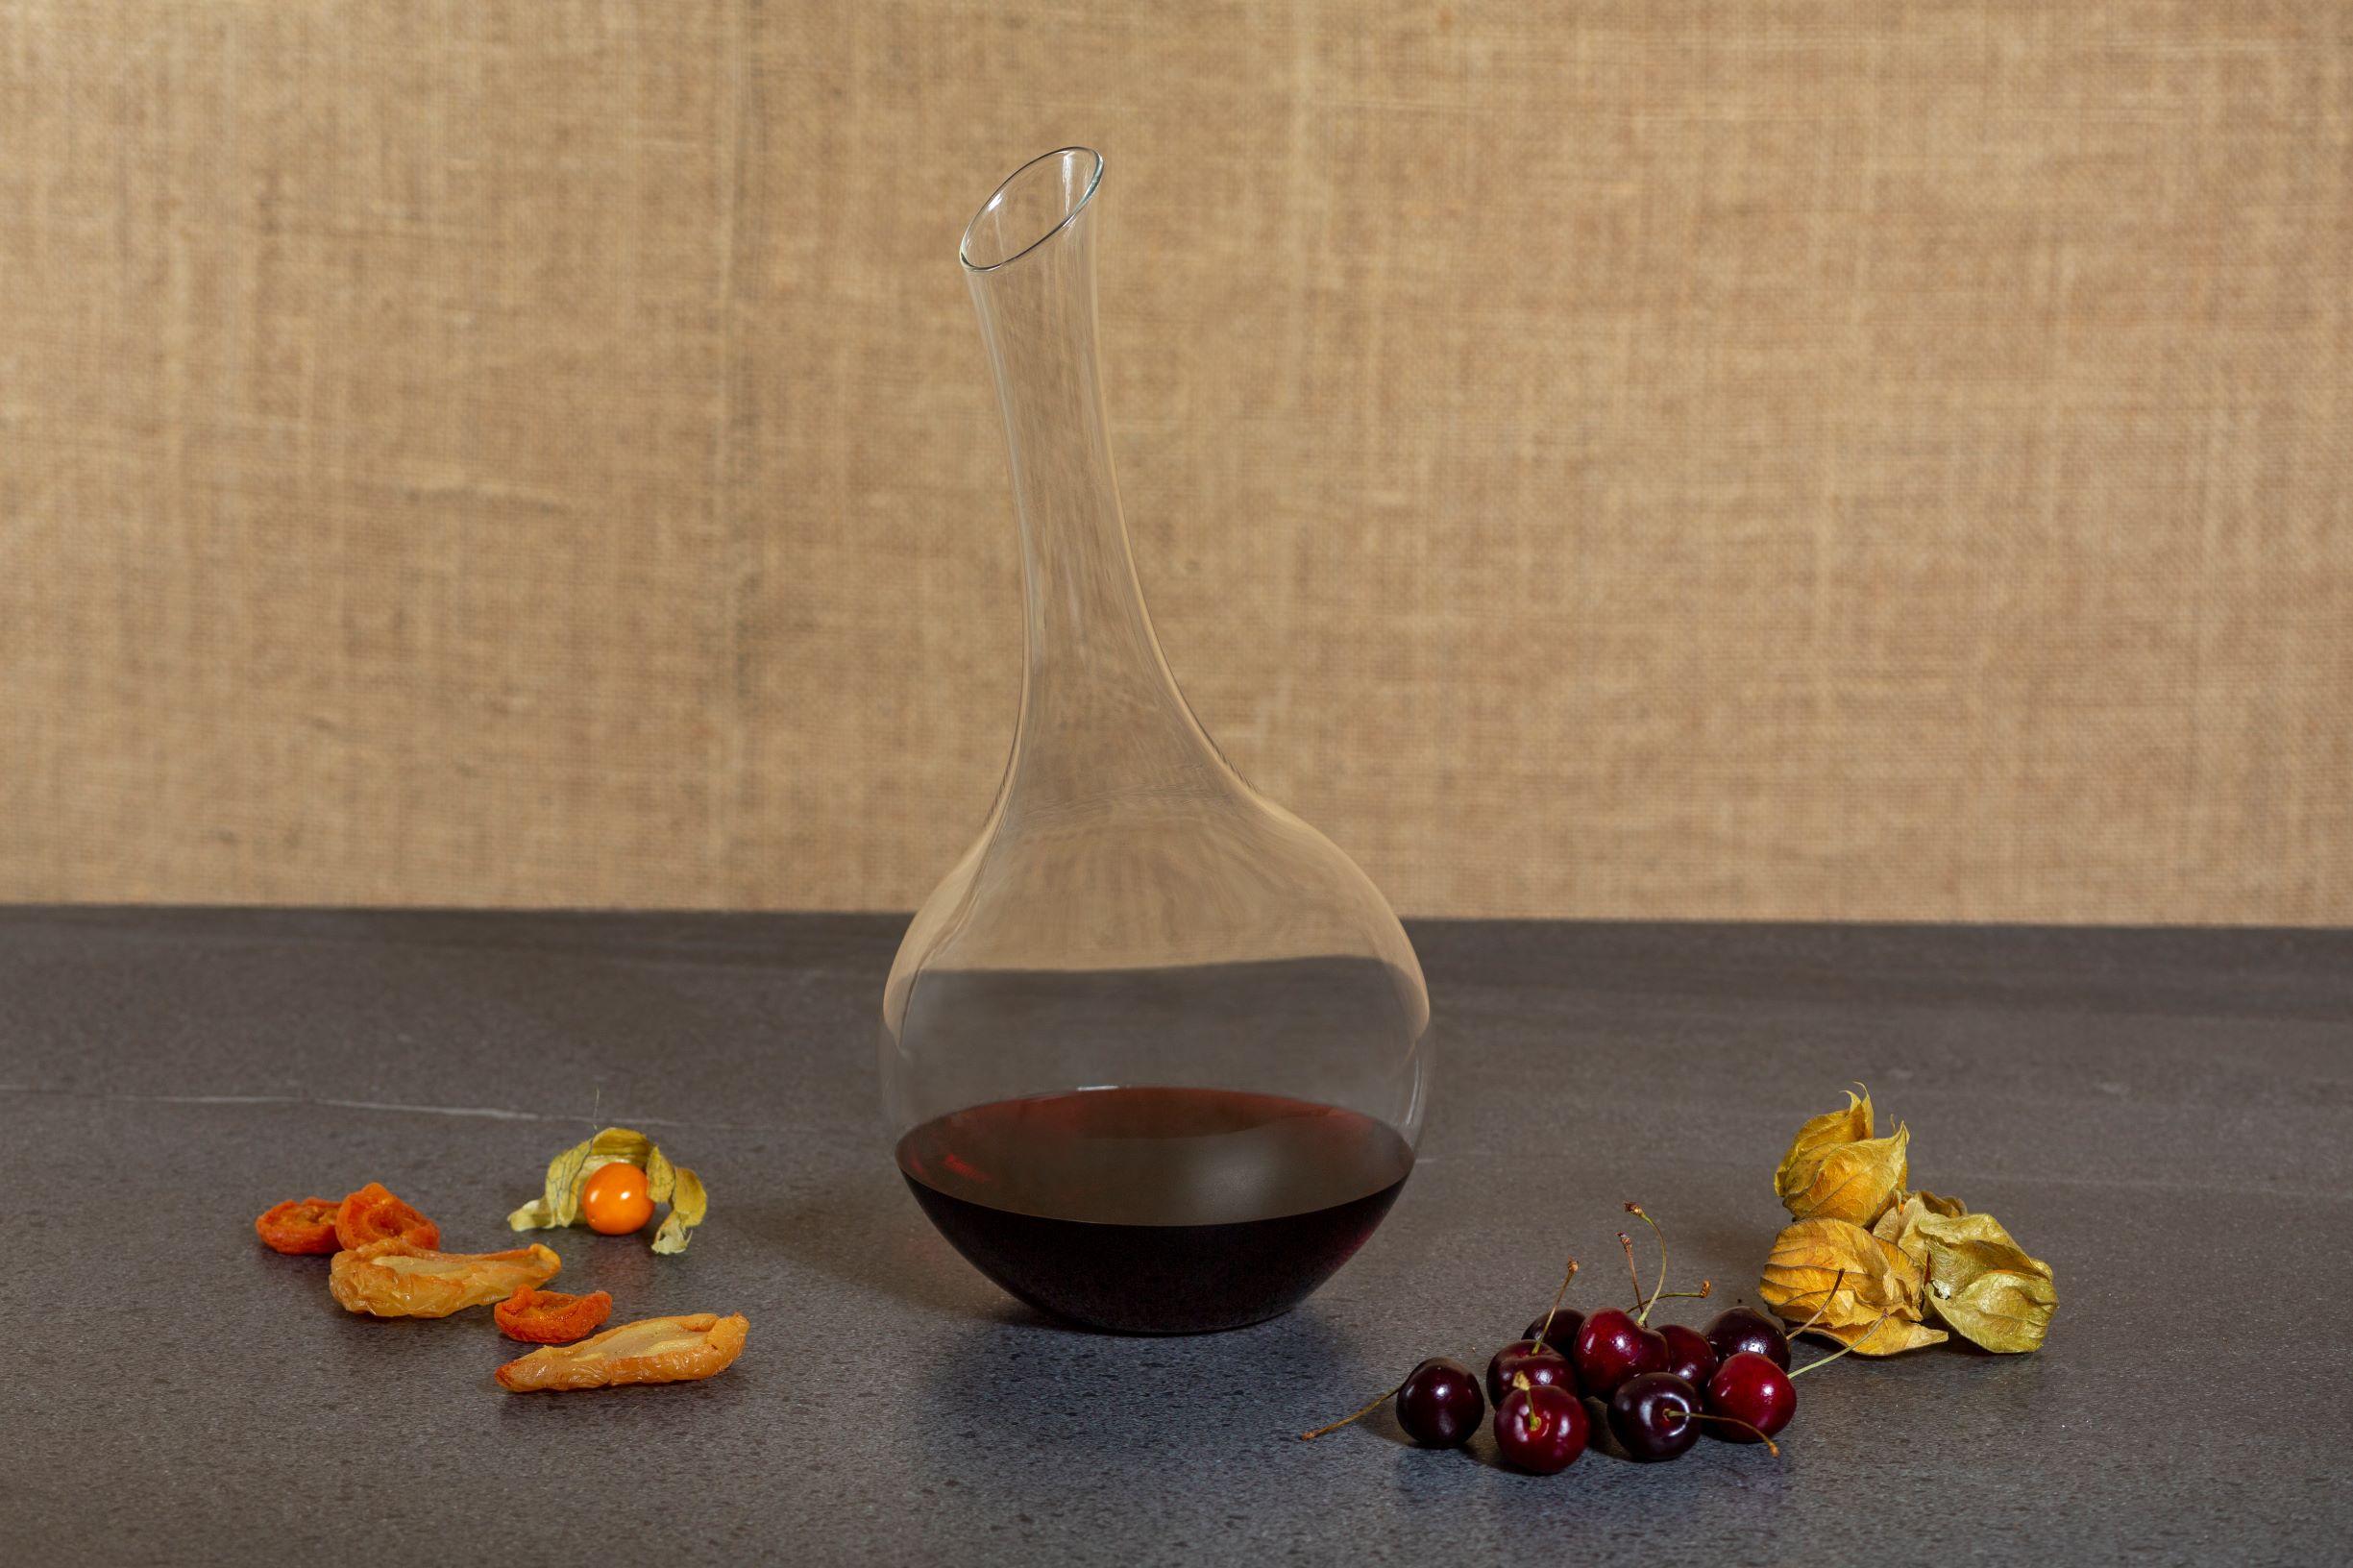 The wine decanter is an organically shaped hand-blown borosilicate glass carafe. 

The Pok collection celebrates the artistry of hand-crafted beadwork made by the Pokot women in Northwest Kenya. Influenced by the hand-carved African gourd fruit